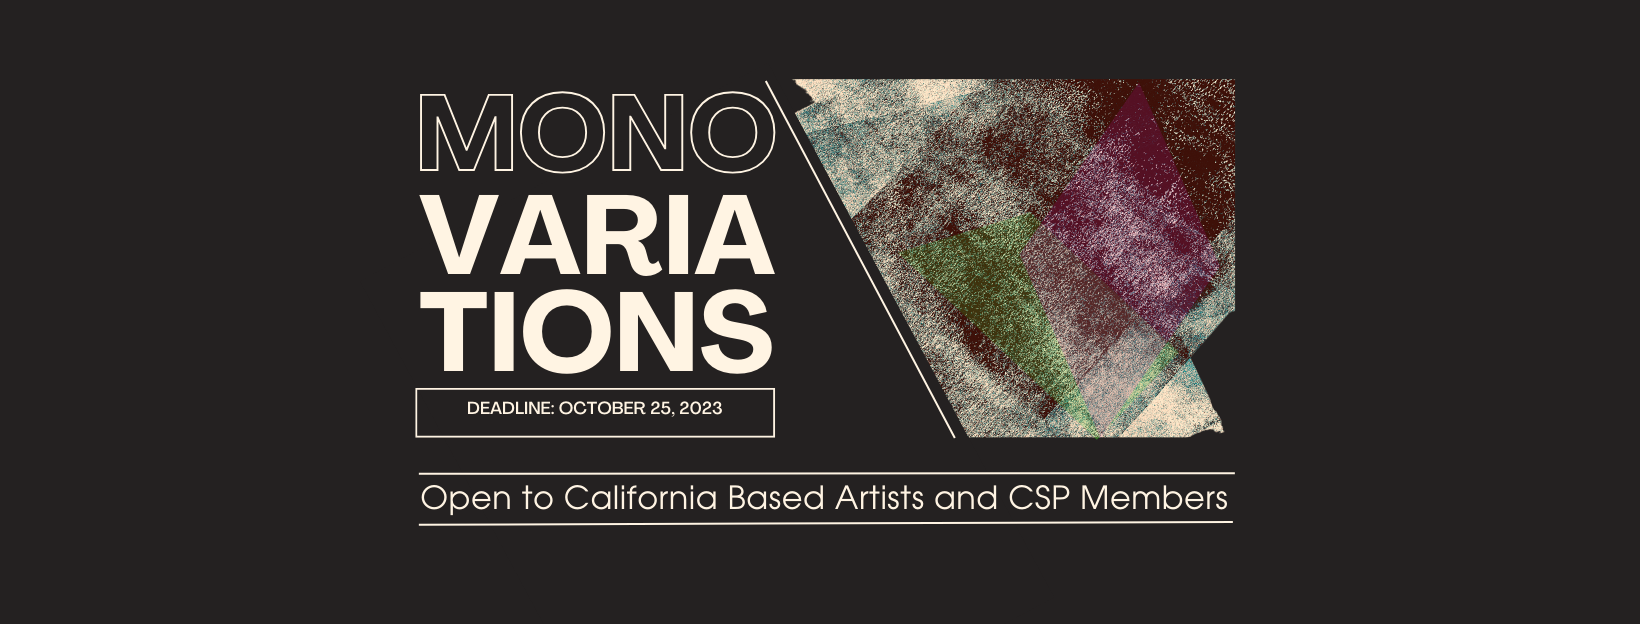 MonoVariations Call For Entry. Deadline Oct 25, 2023. Open to all California and CSP members.